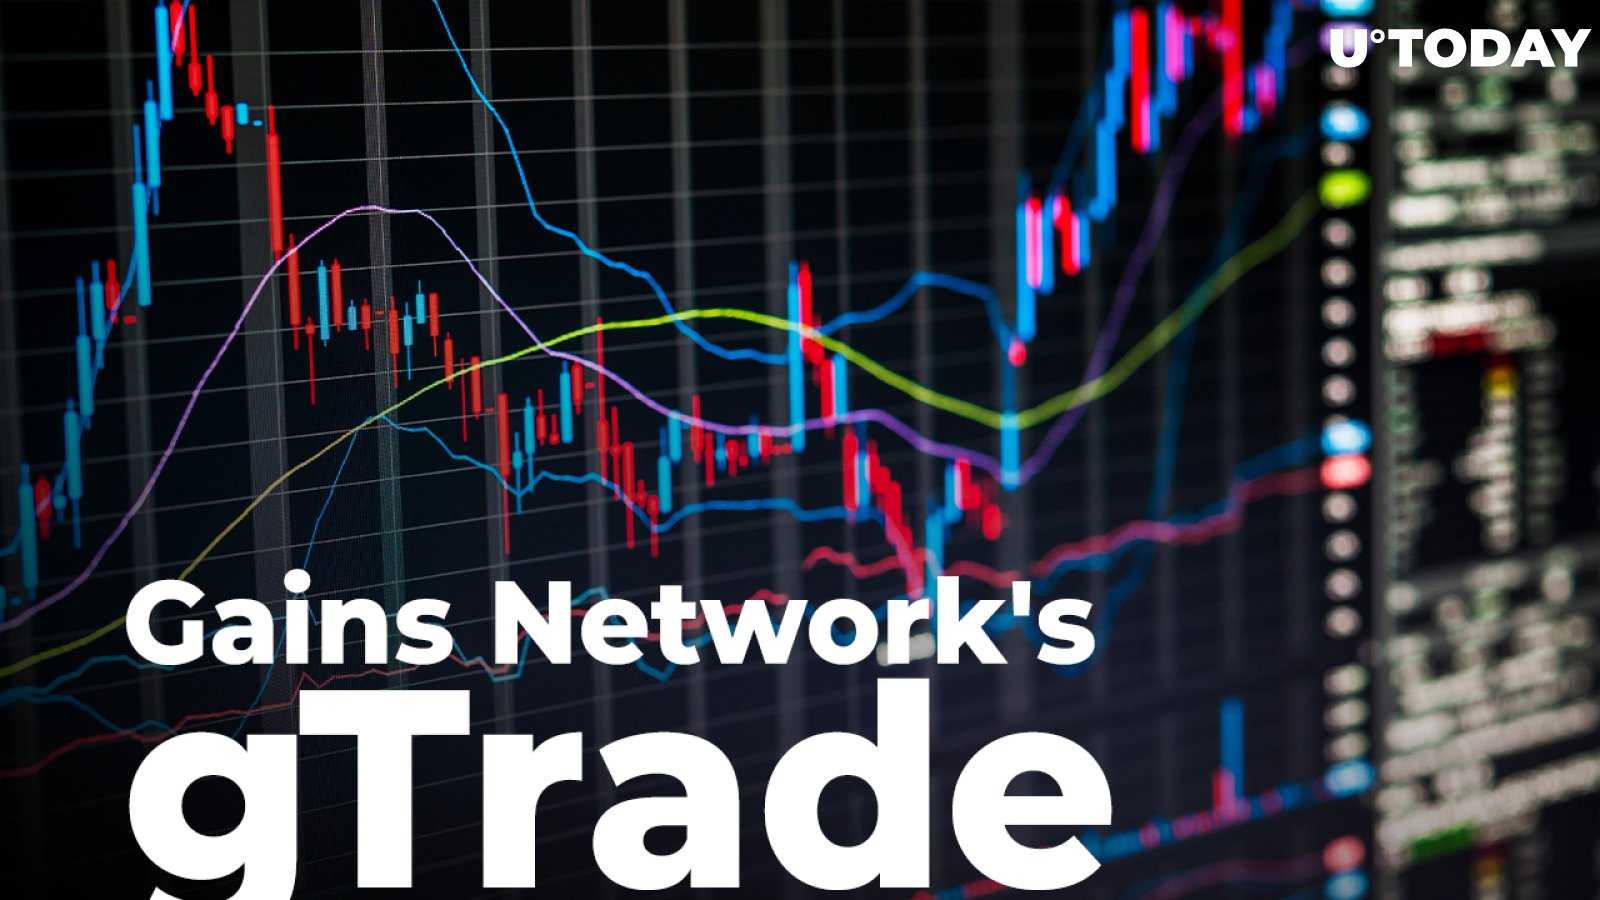 Leveraged Trading on Stocks Debuts on Gains Network's gTrade